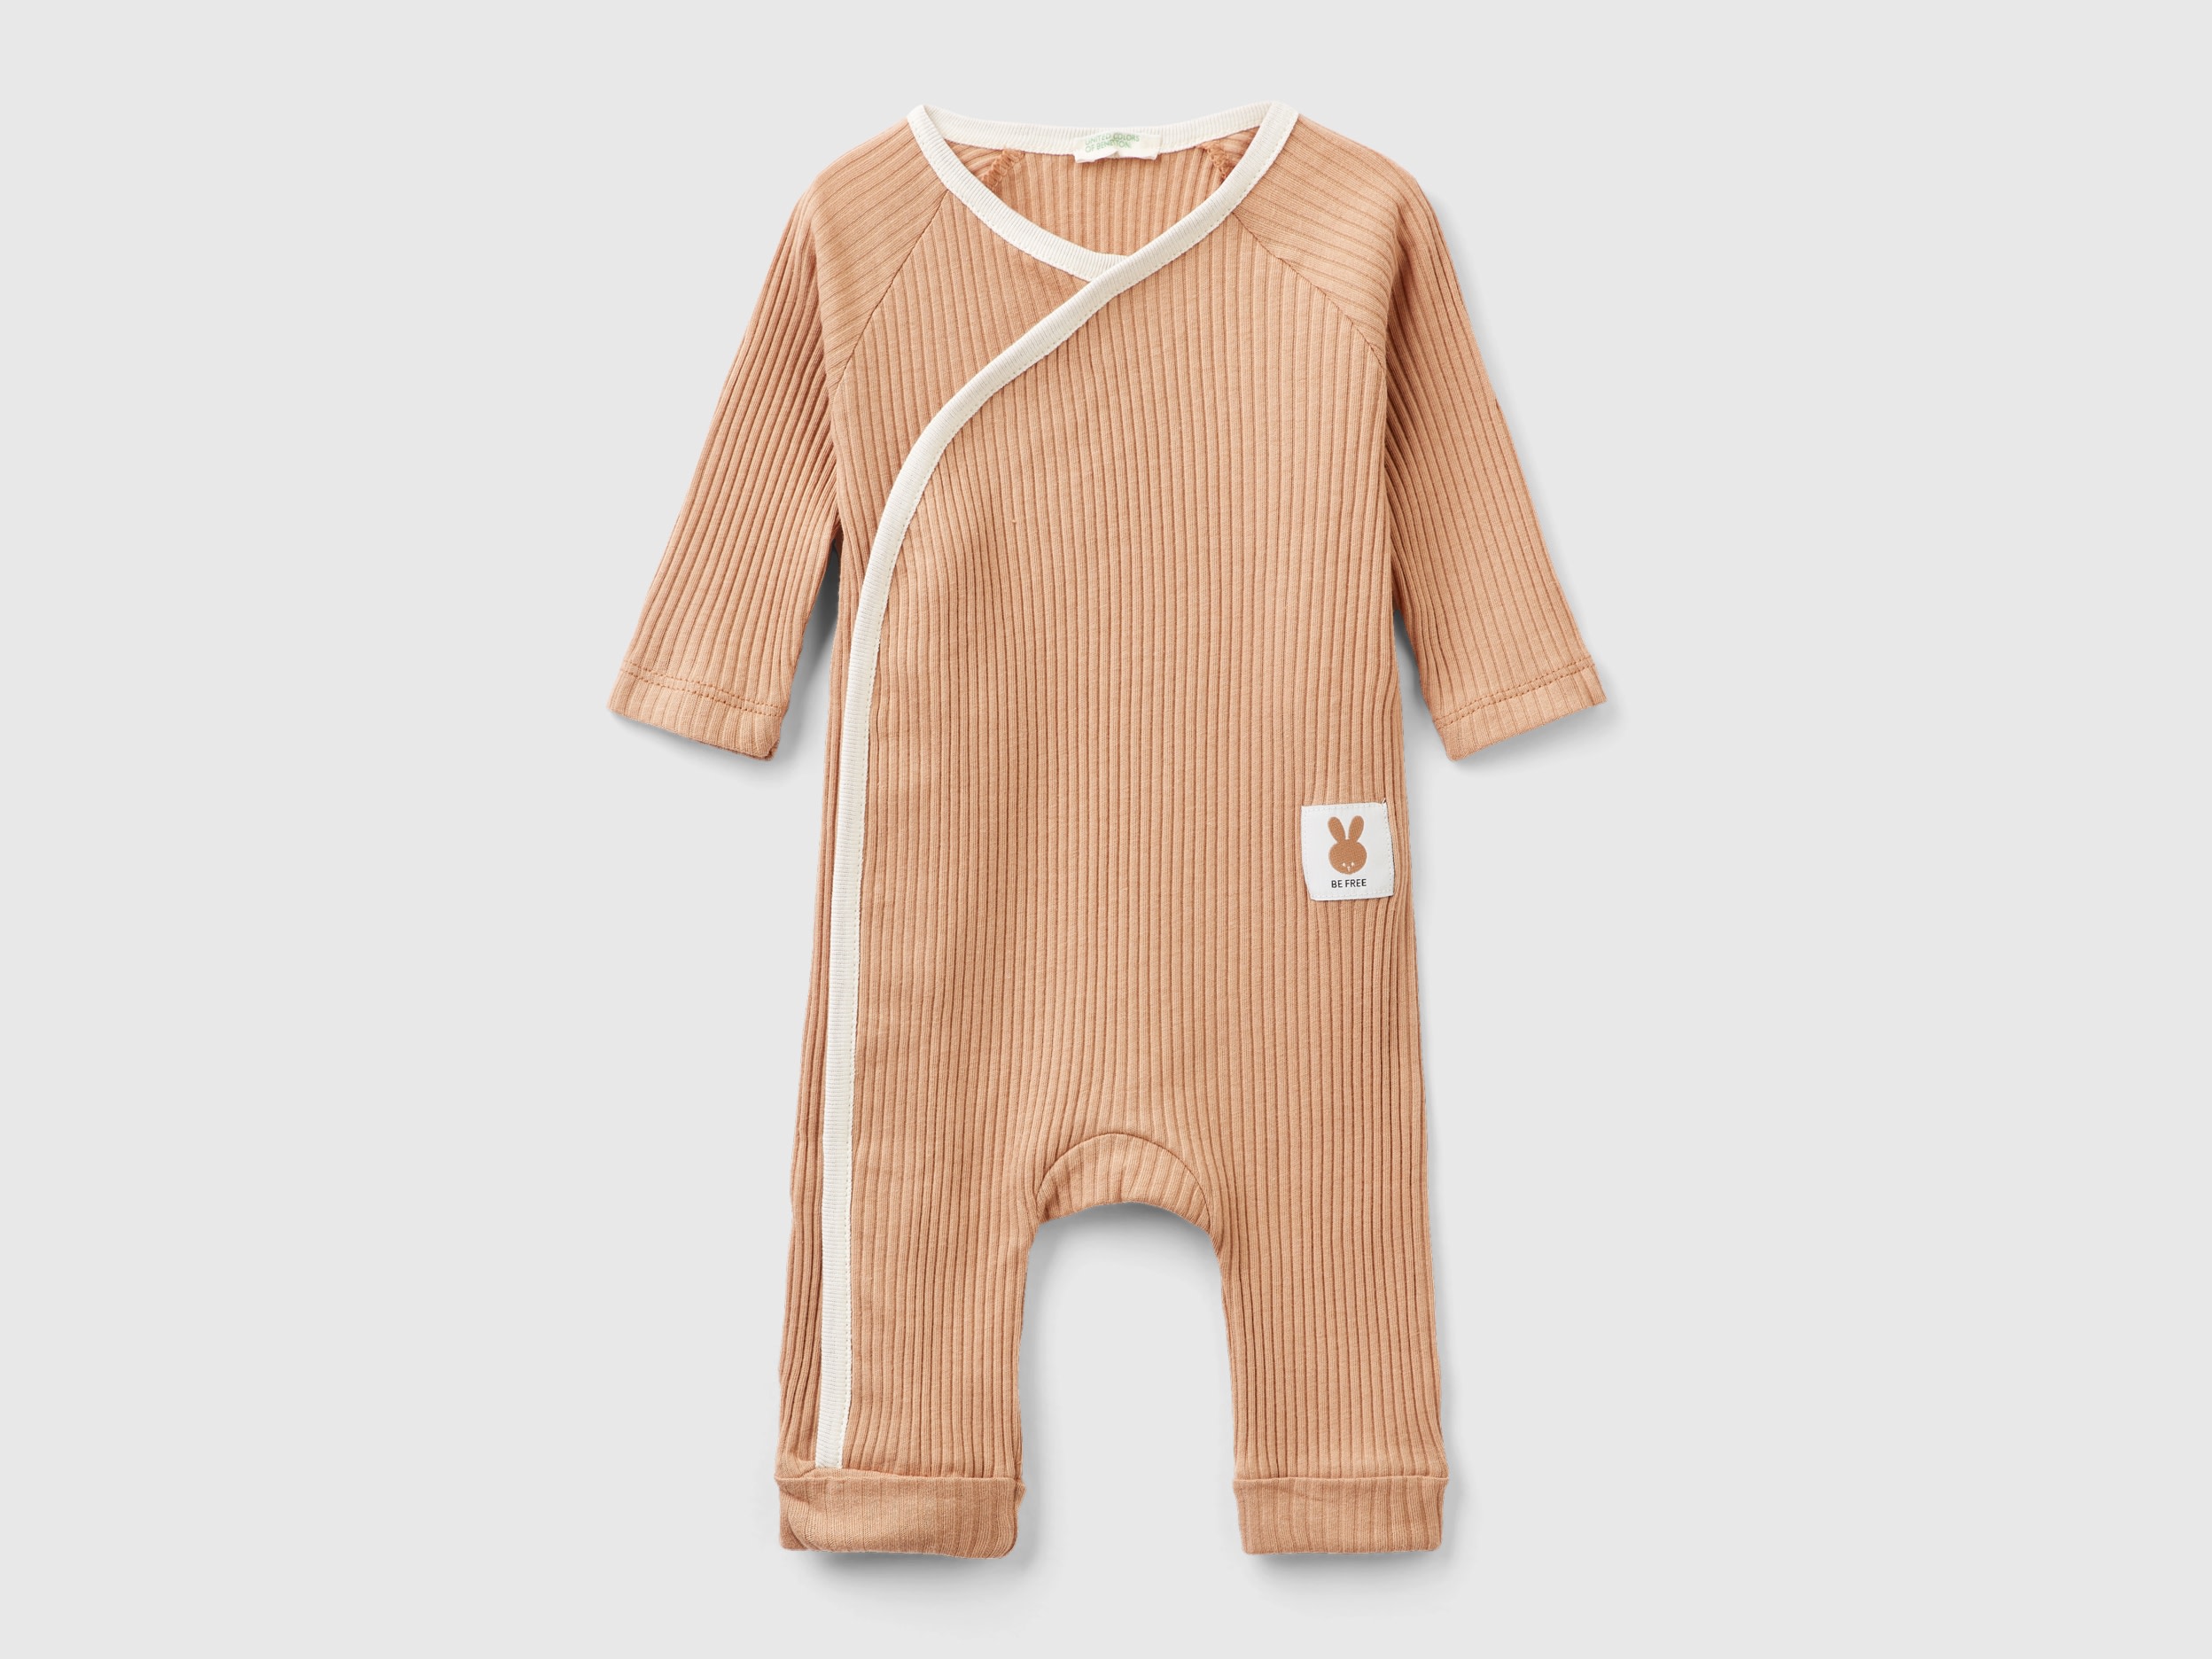 Benetton, Ribbed Onesie In Organic Cotton, size 1-3, Camel, Kids